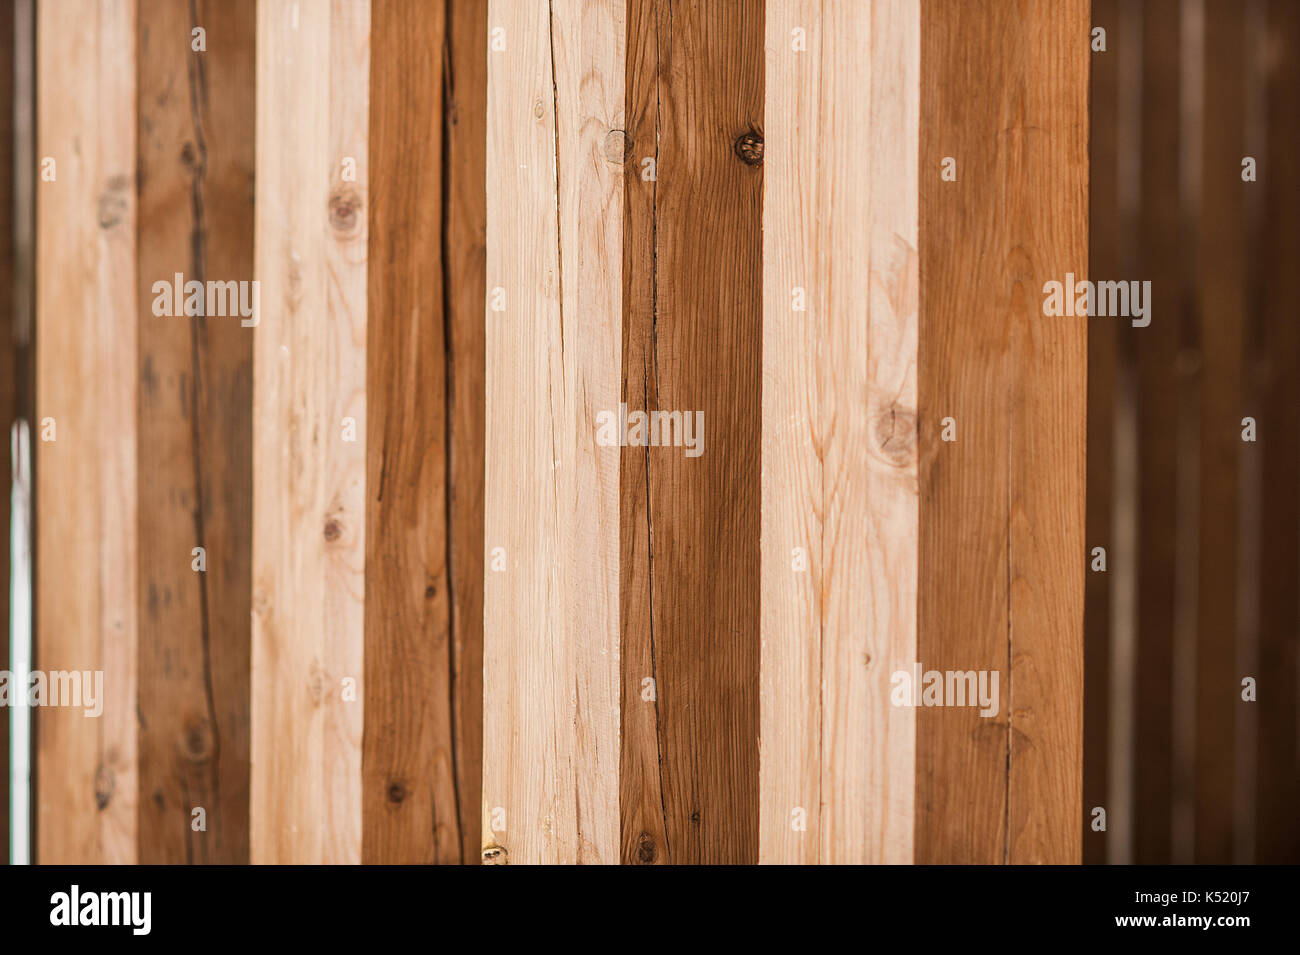 Texture - wooden boards brown color. Texture of a wooden wall from a bar. view of wooden columns Stock Photo